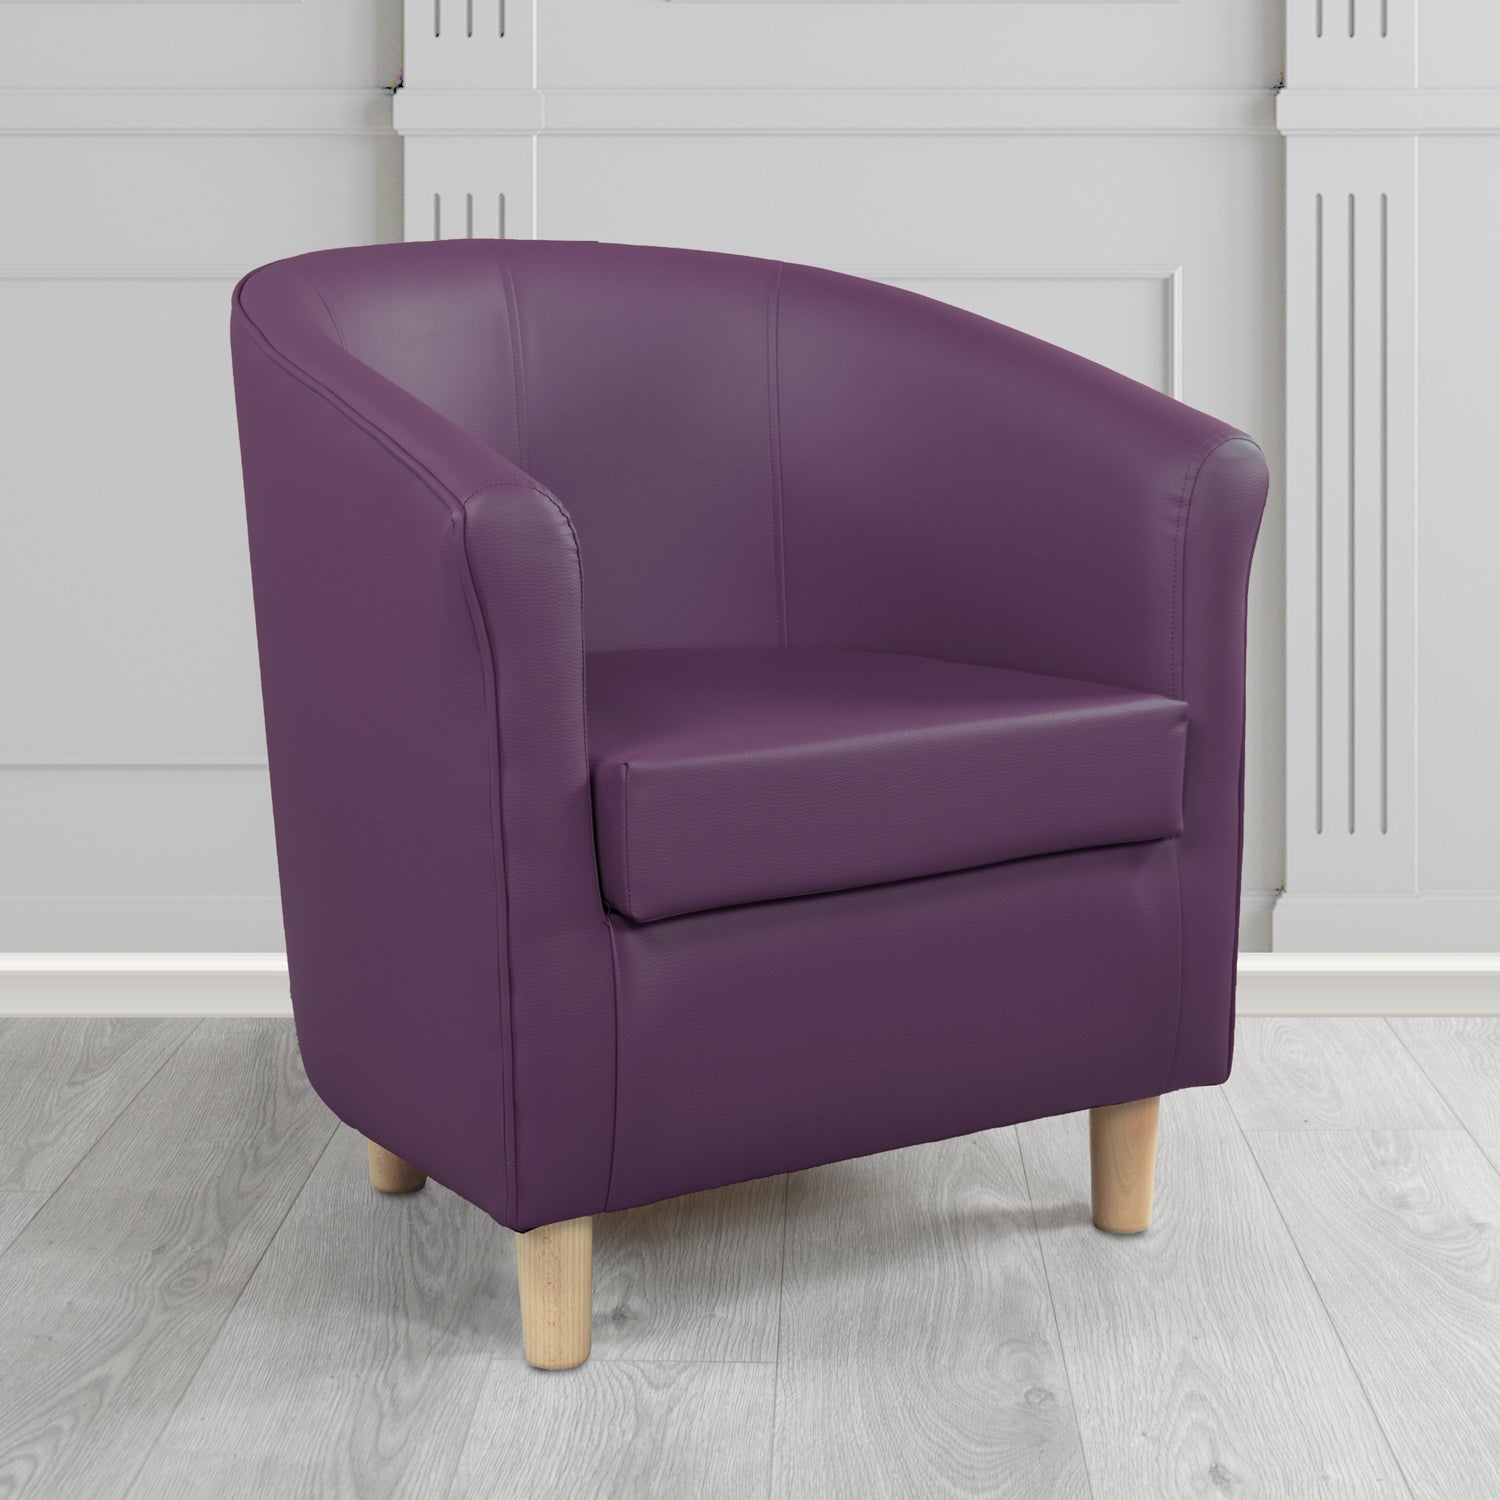 Tuscany Just Colour Damson Antimicrobial Crib 5 Contract Faux Leather Tub Chair